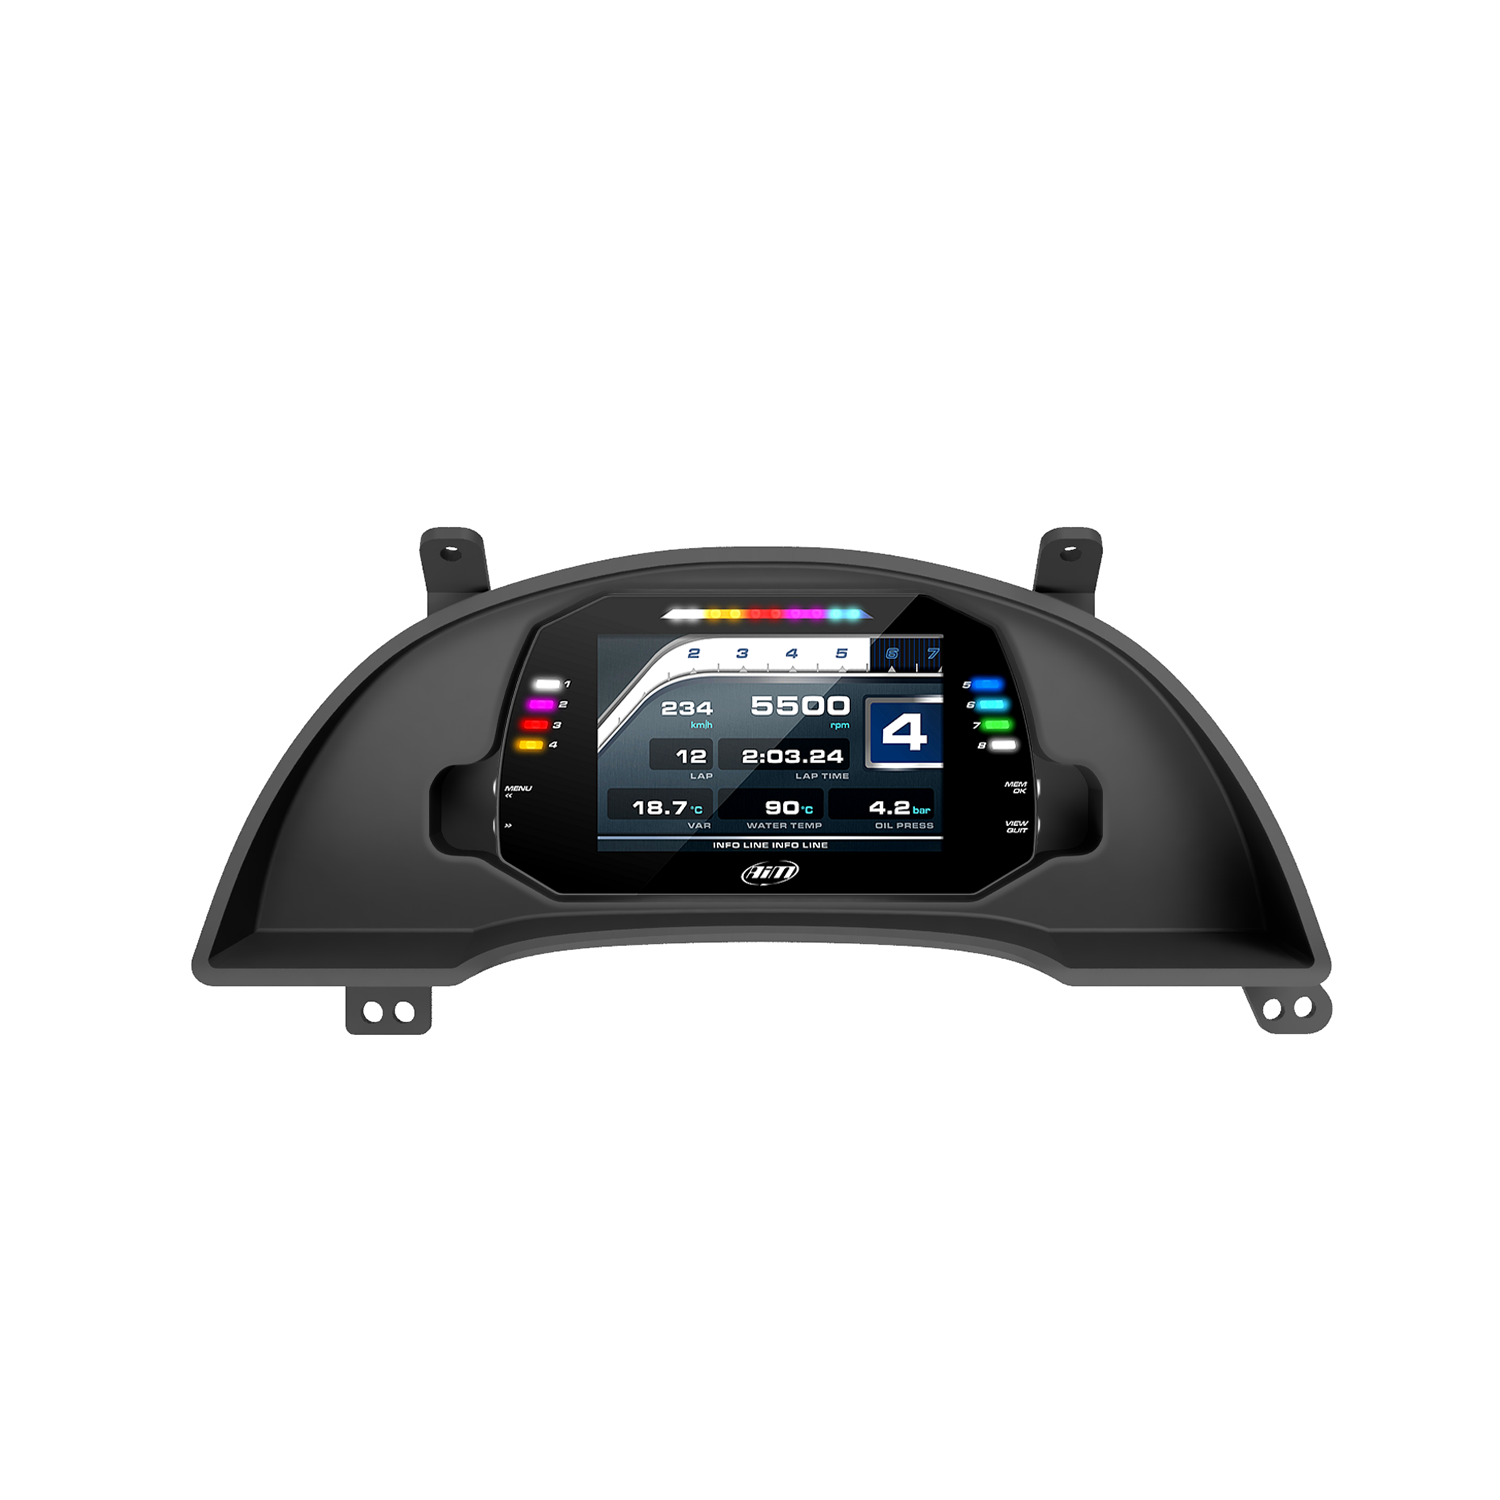 Toyota Celica 6th Gen ST205 93-99 Dash Mount - Prices from 310.00 to 850.00